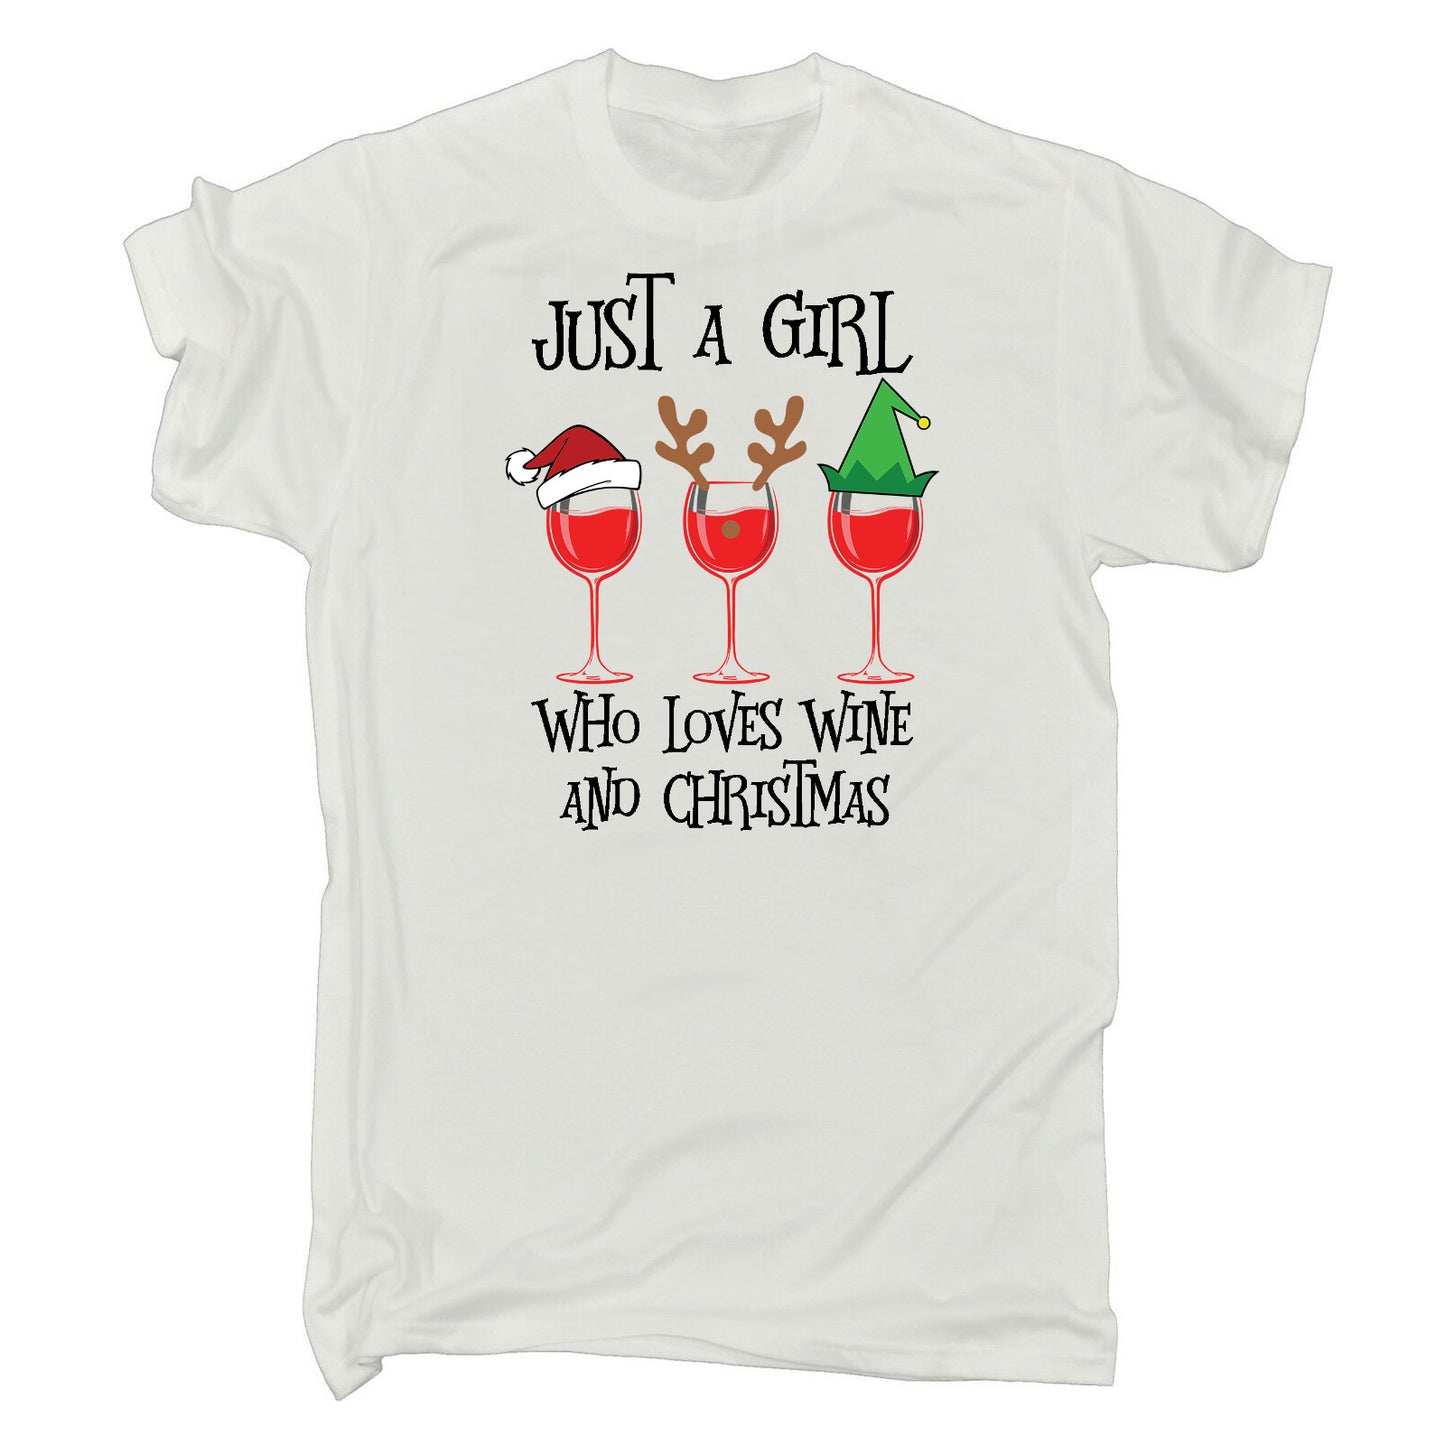 Just A Girl Who Loves Wind And Christmas - Mens Funny T-Shirt Tshirts